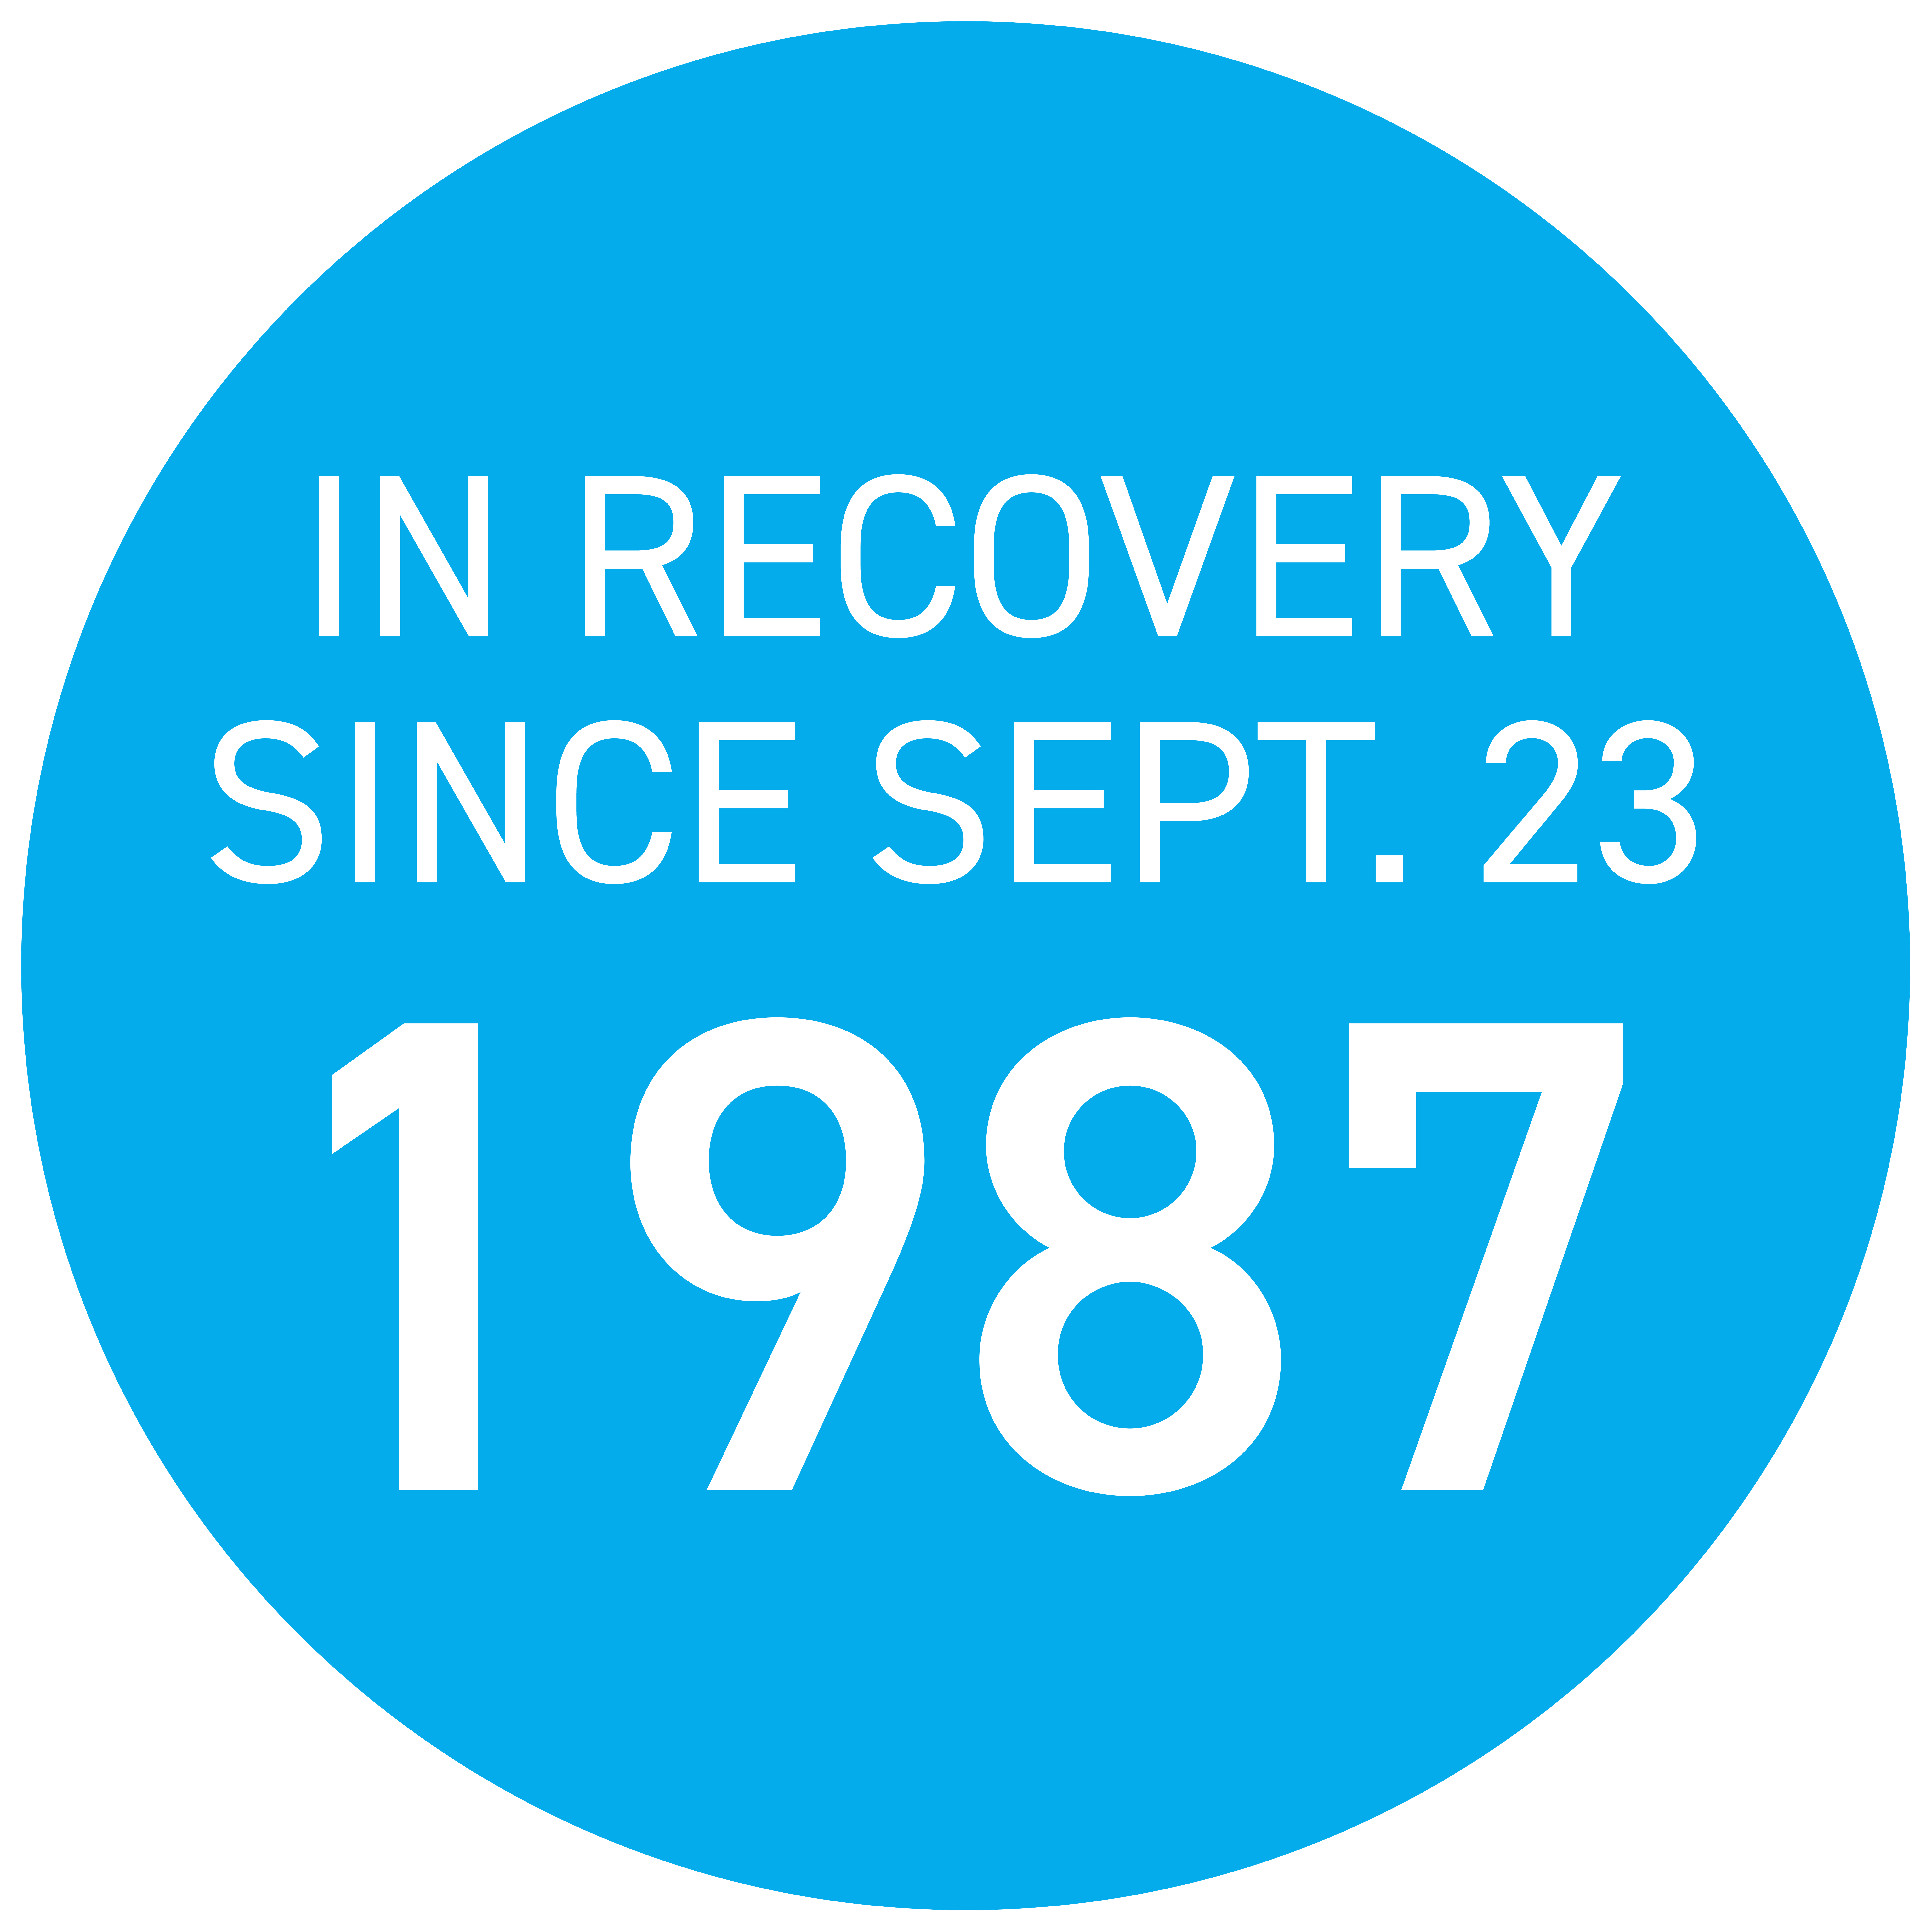 In recovery since September 23, 1987.